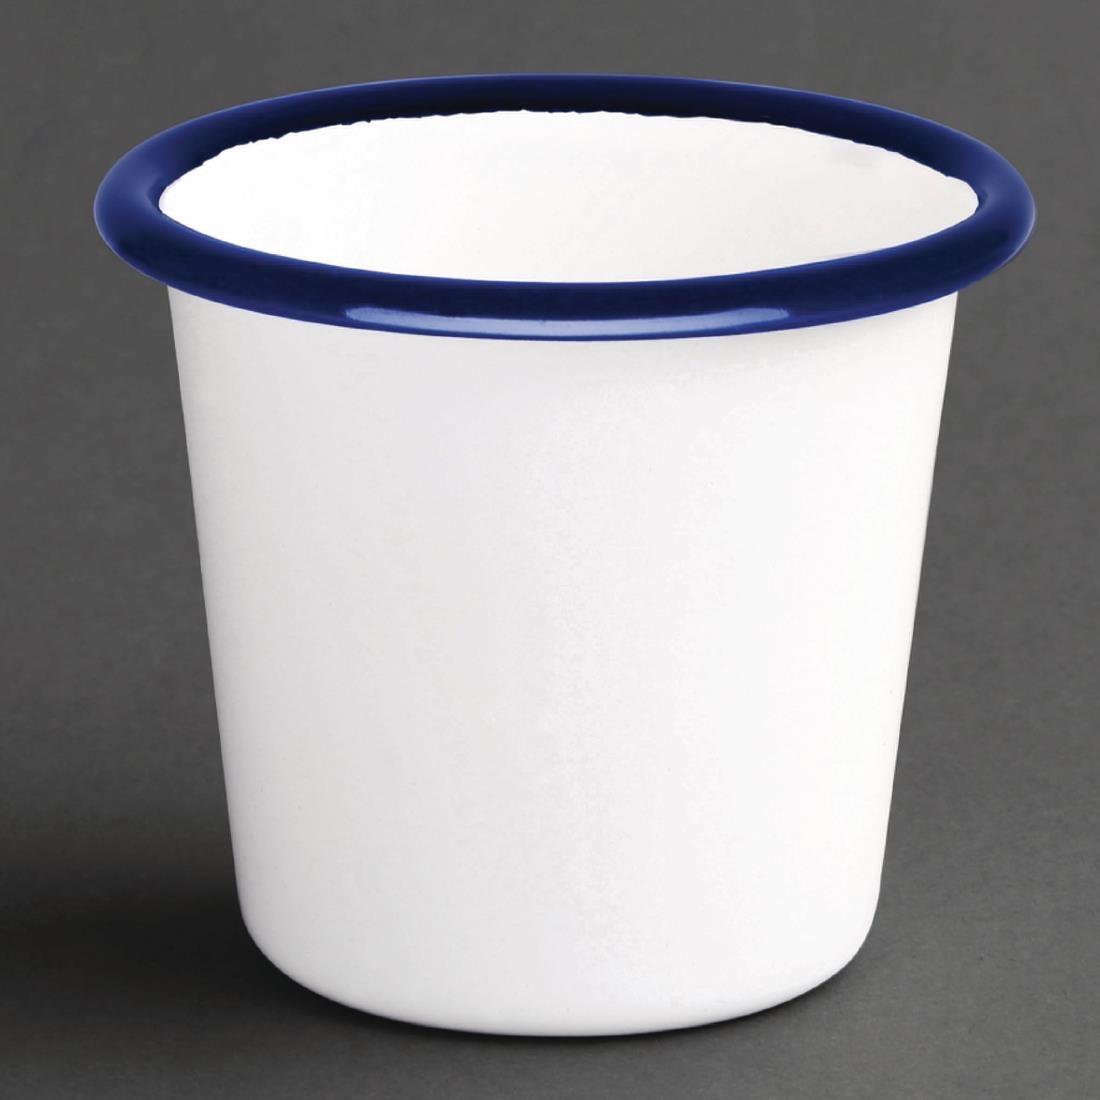 Olympia Enamel Sauce Cup White and Blue (Pack of 6) - DC383  - 1